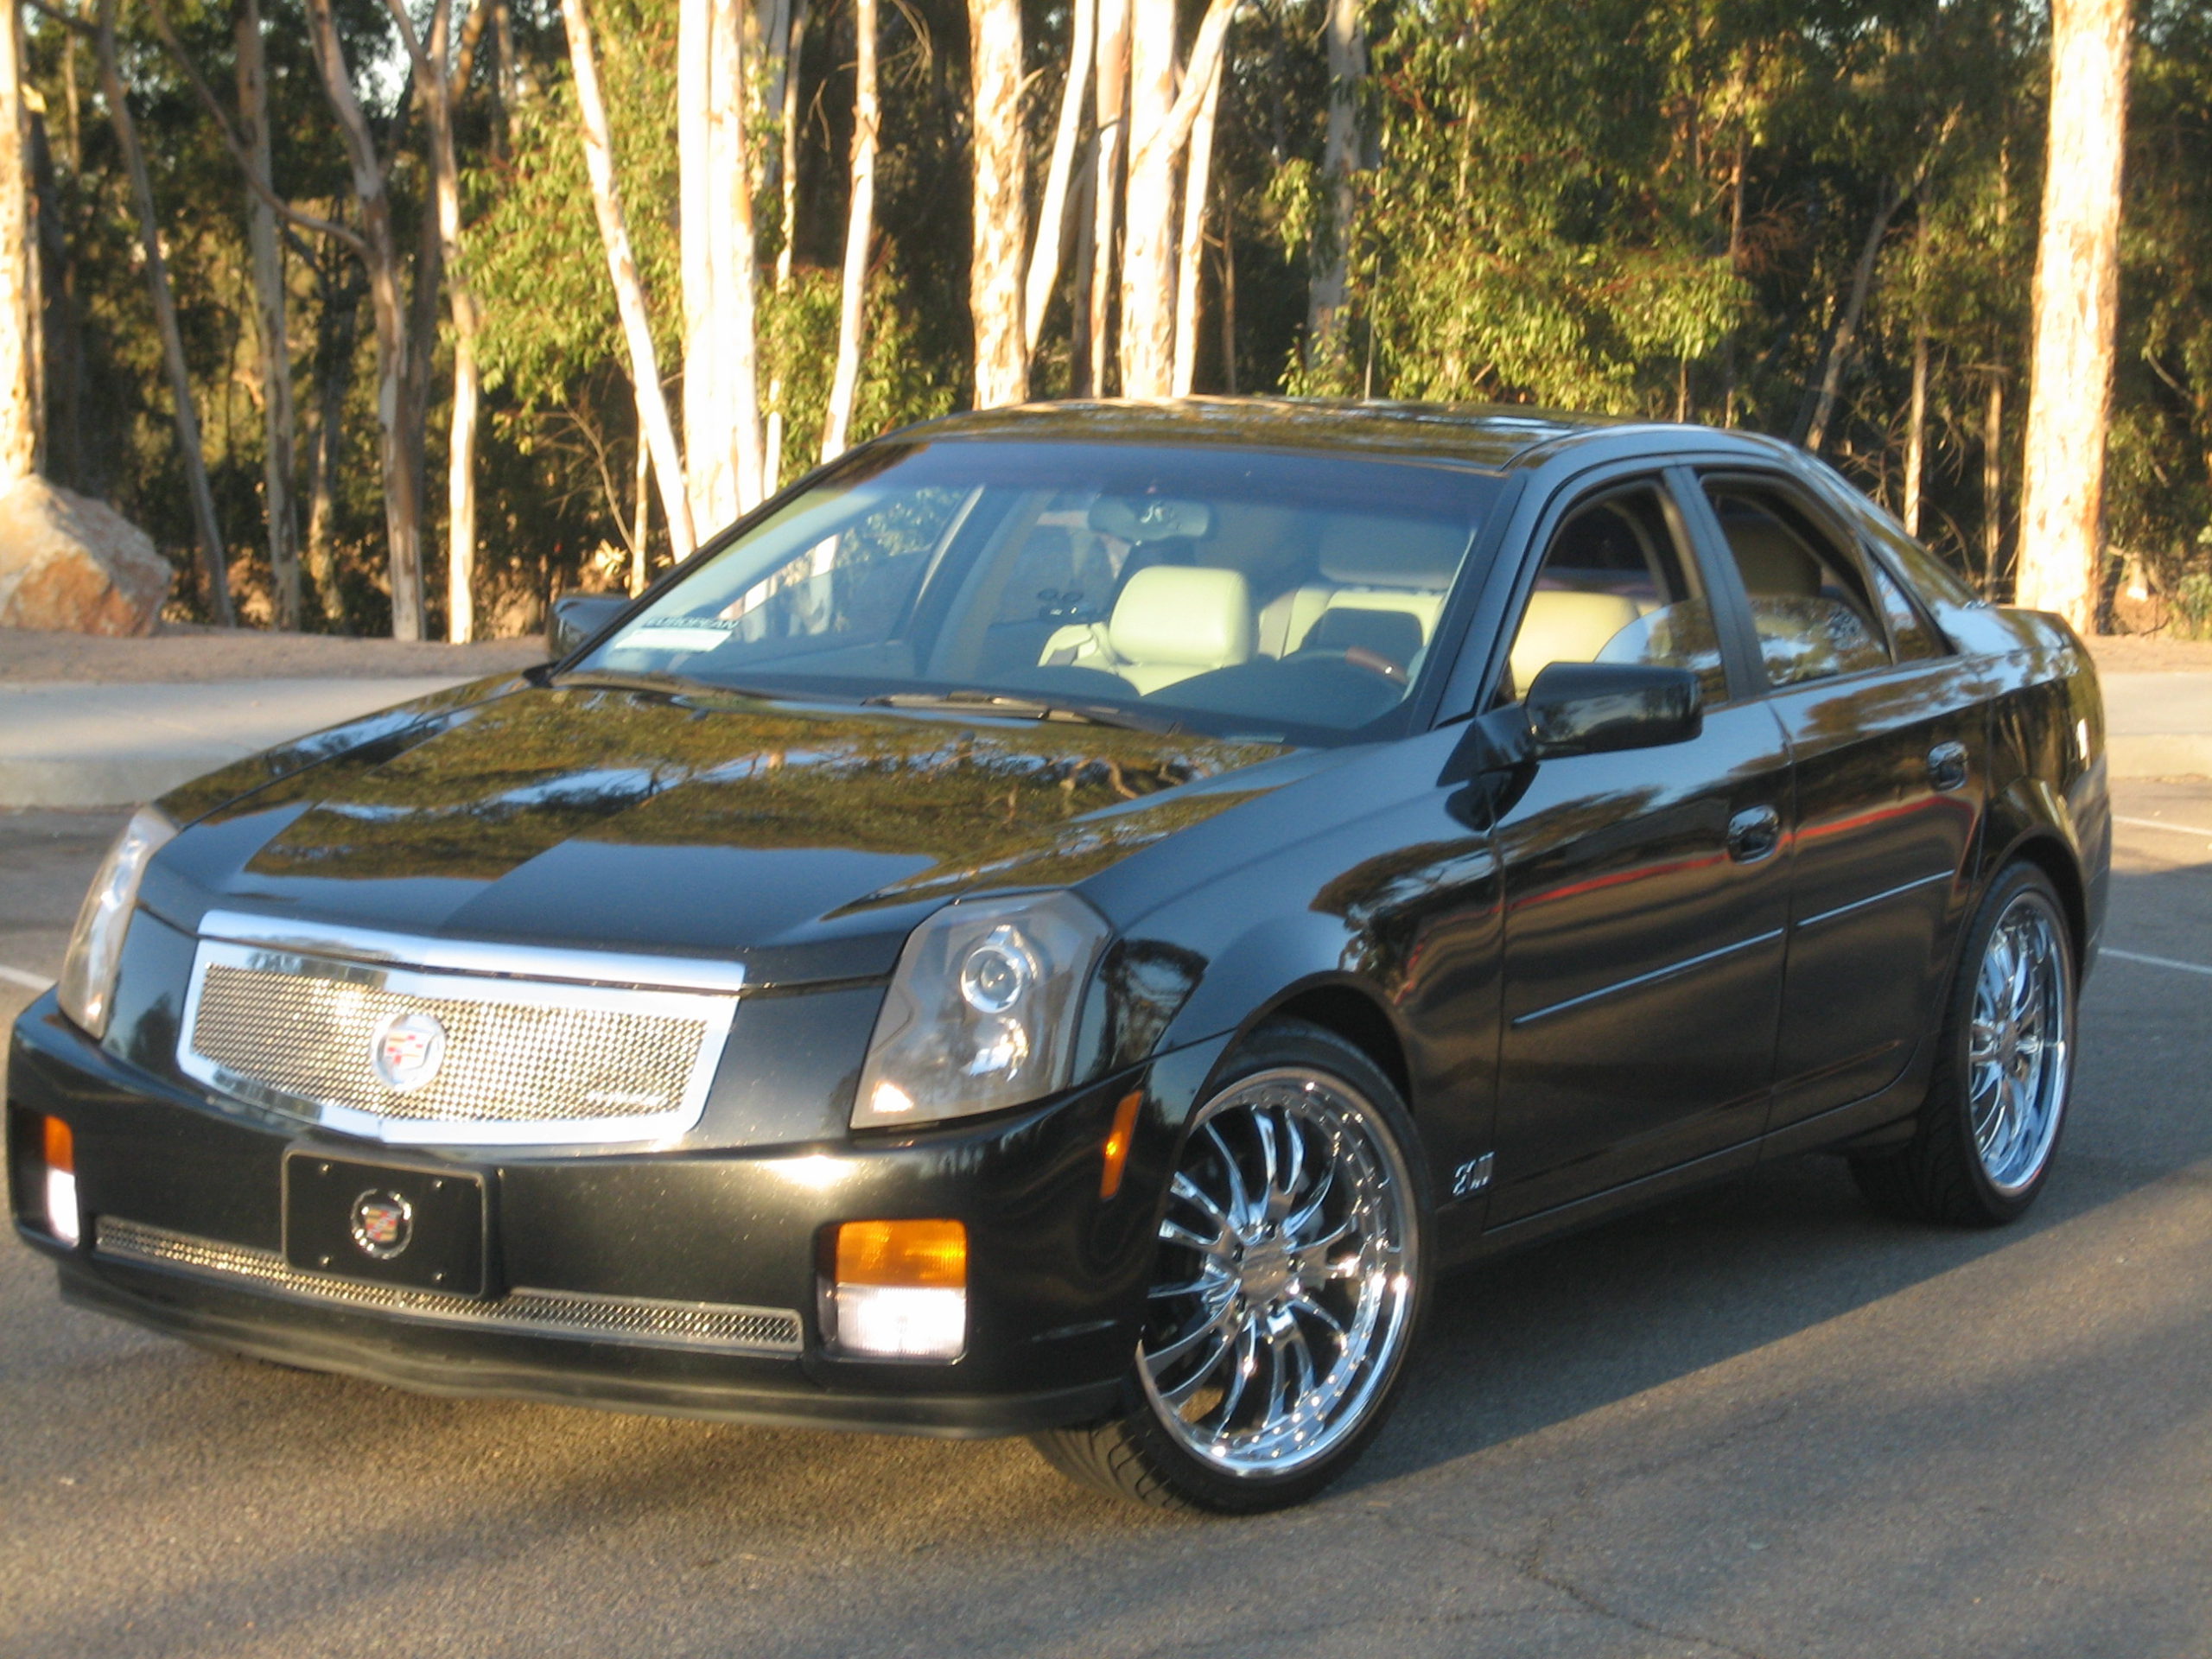 2000s, cadillac, Year In Review